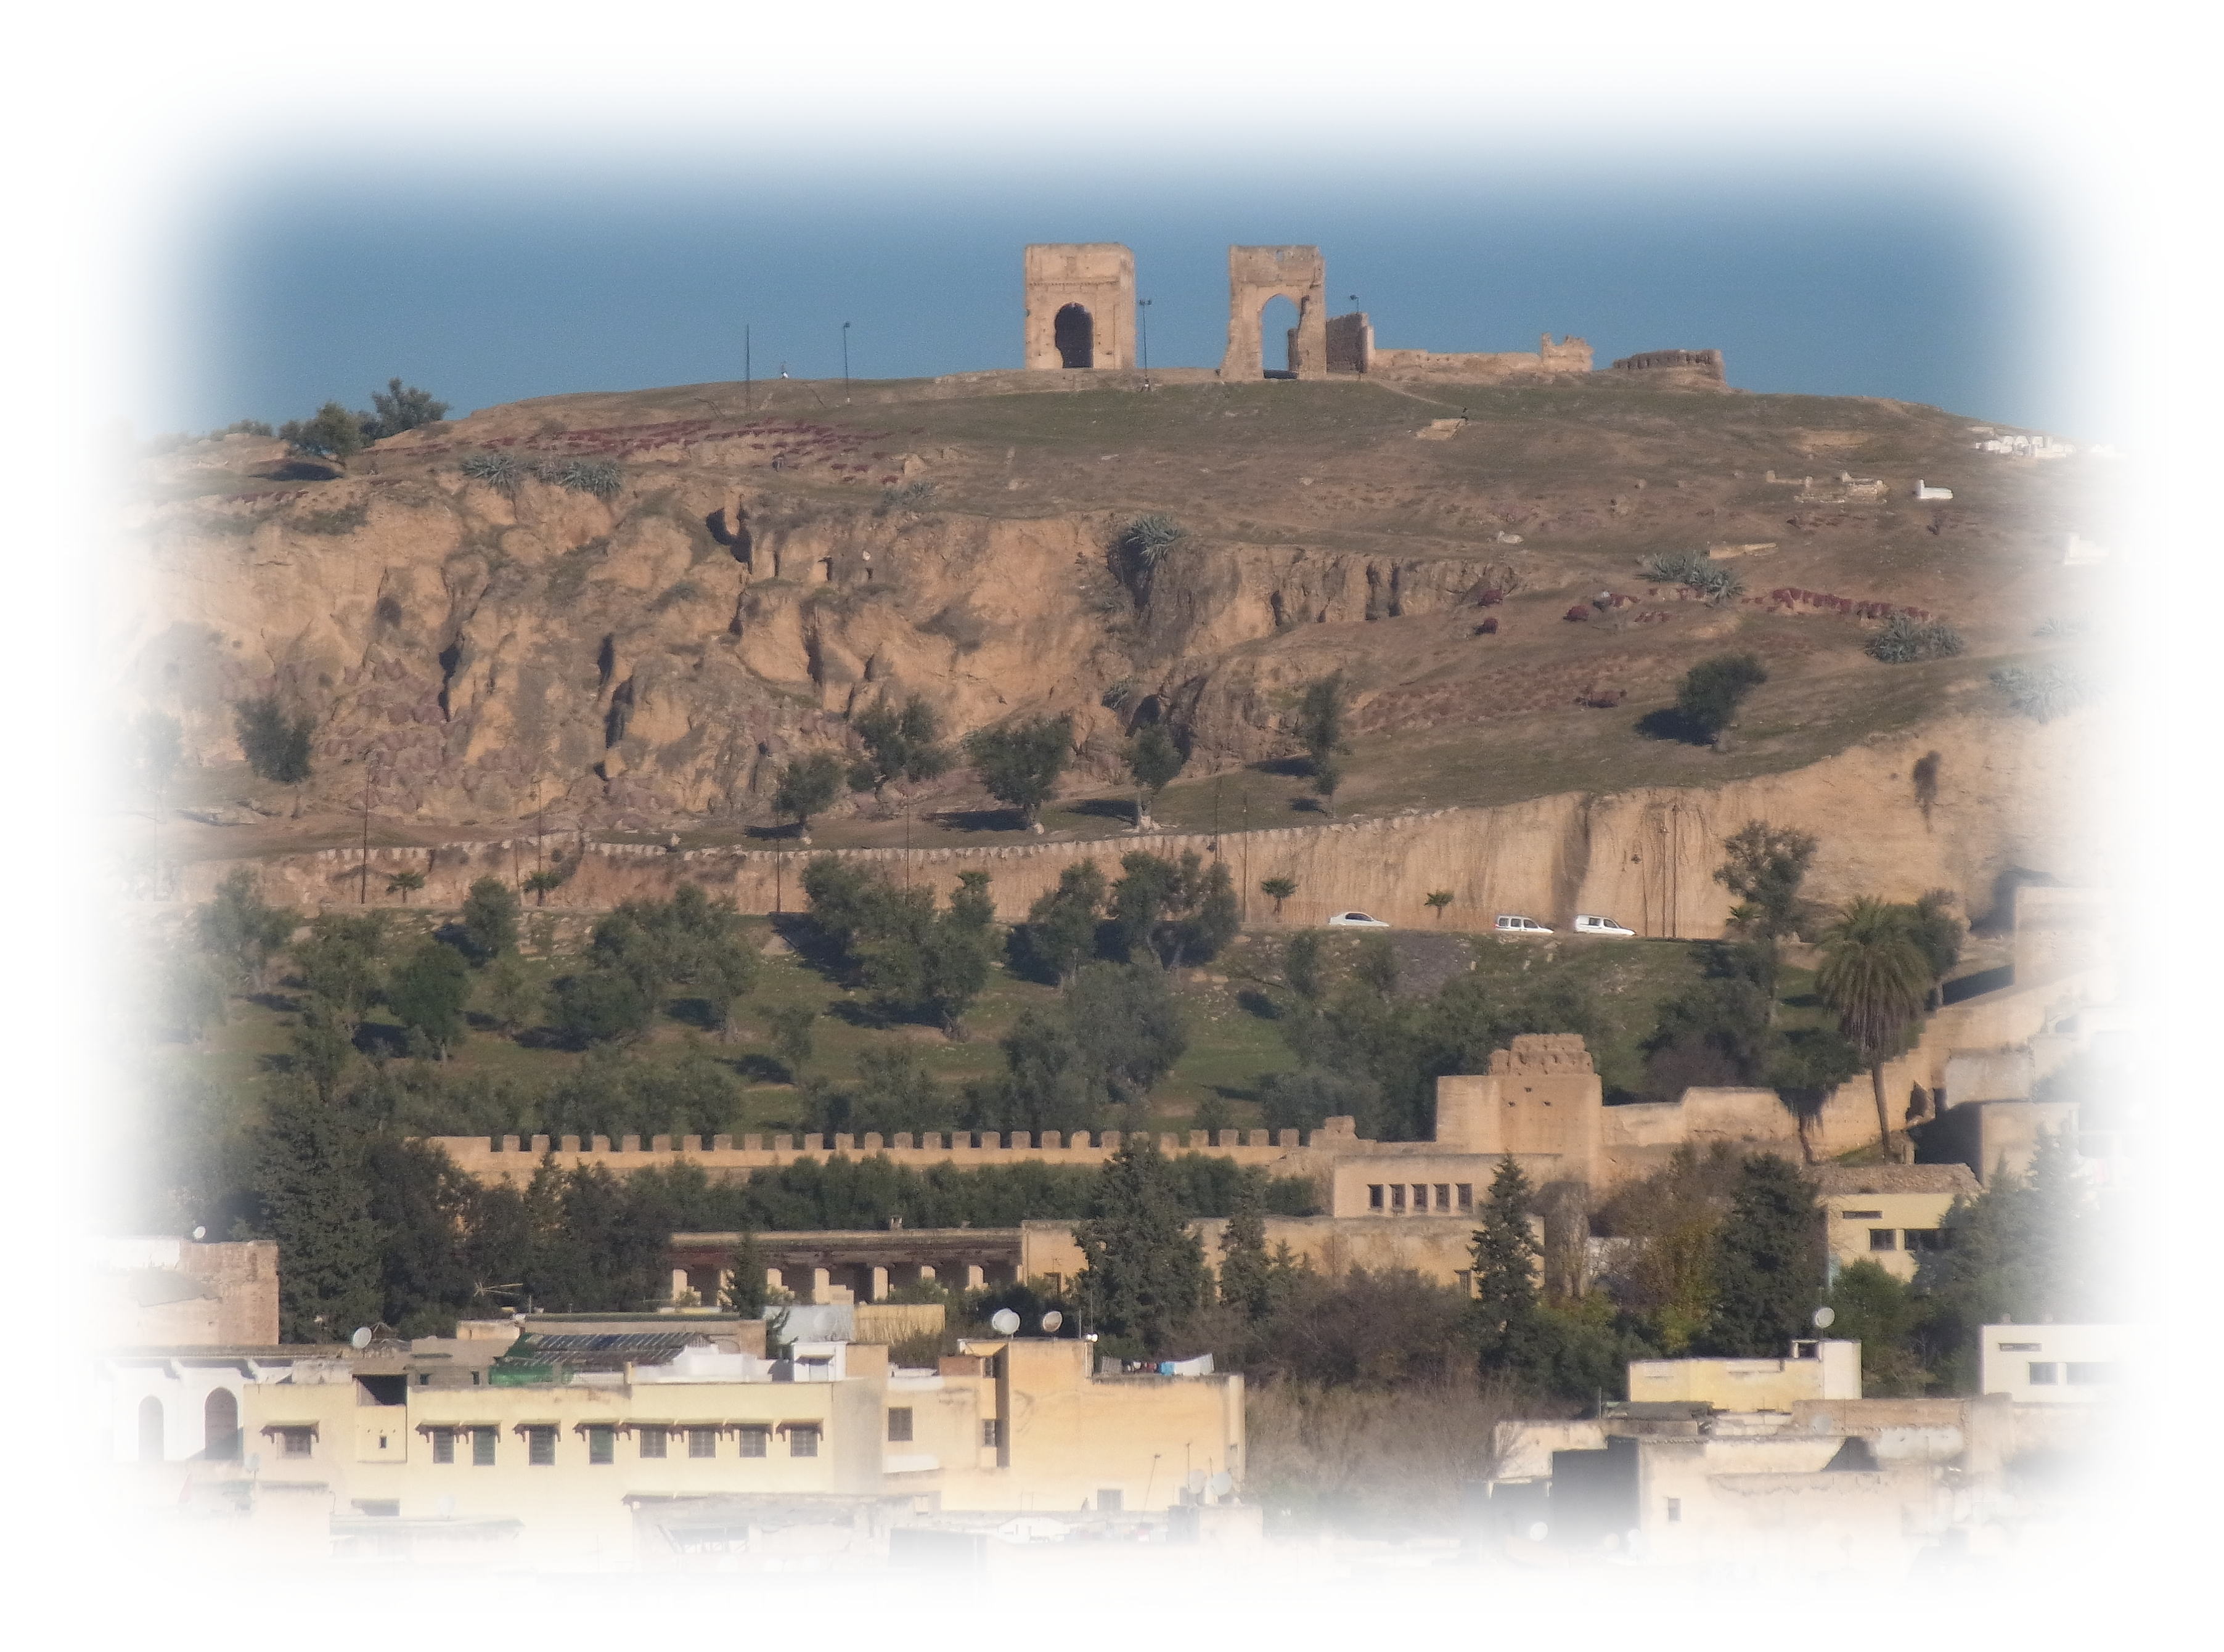 The ruins seen on the hill of Fez.